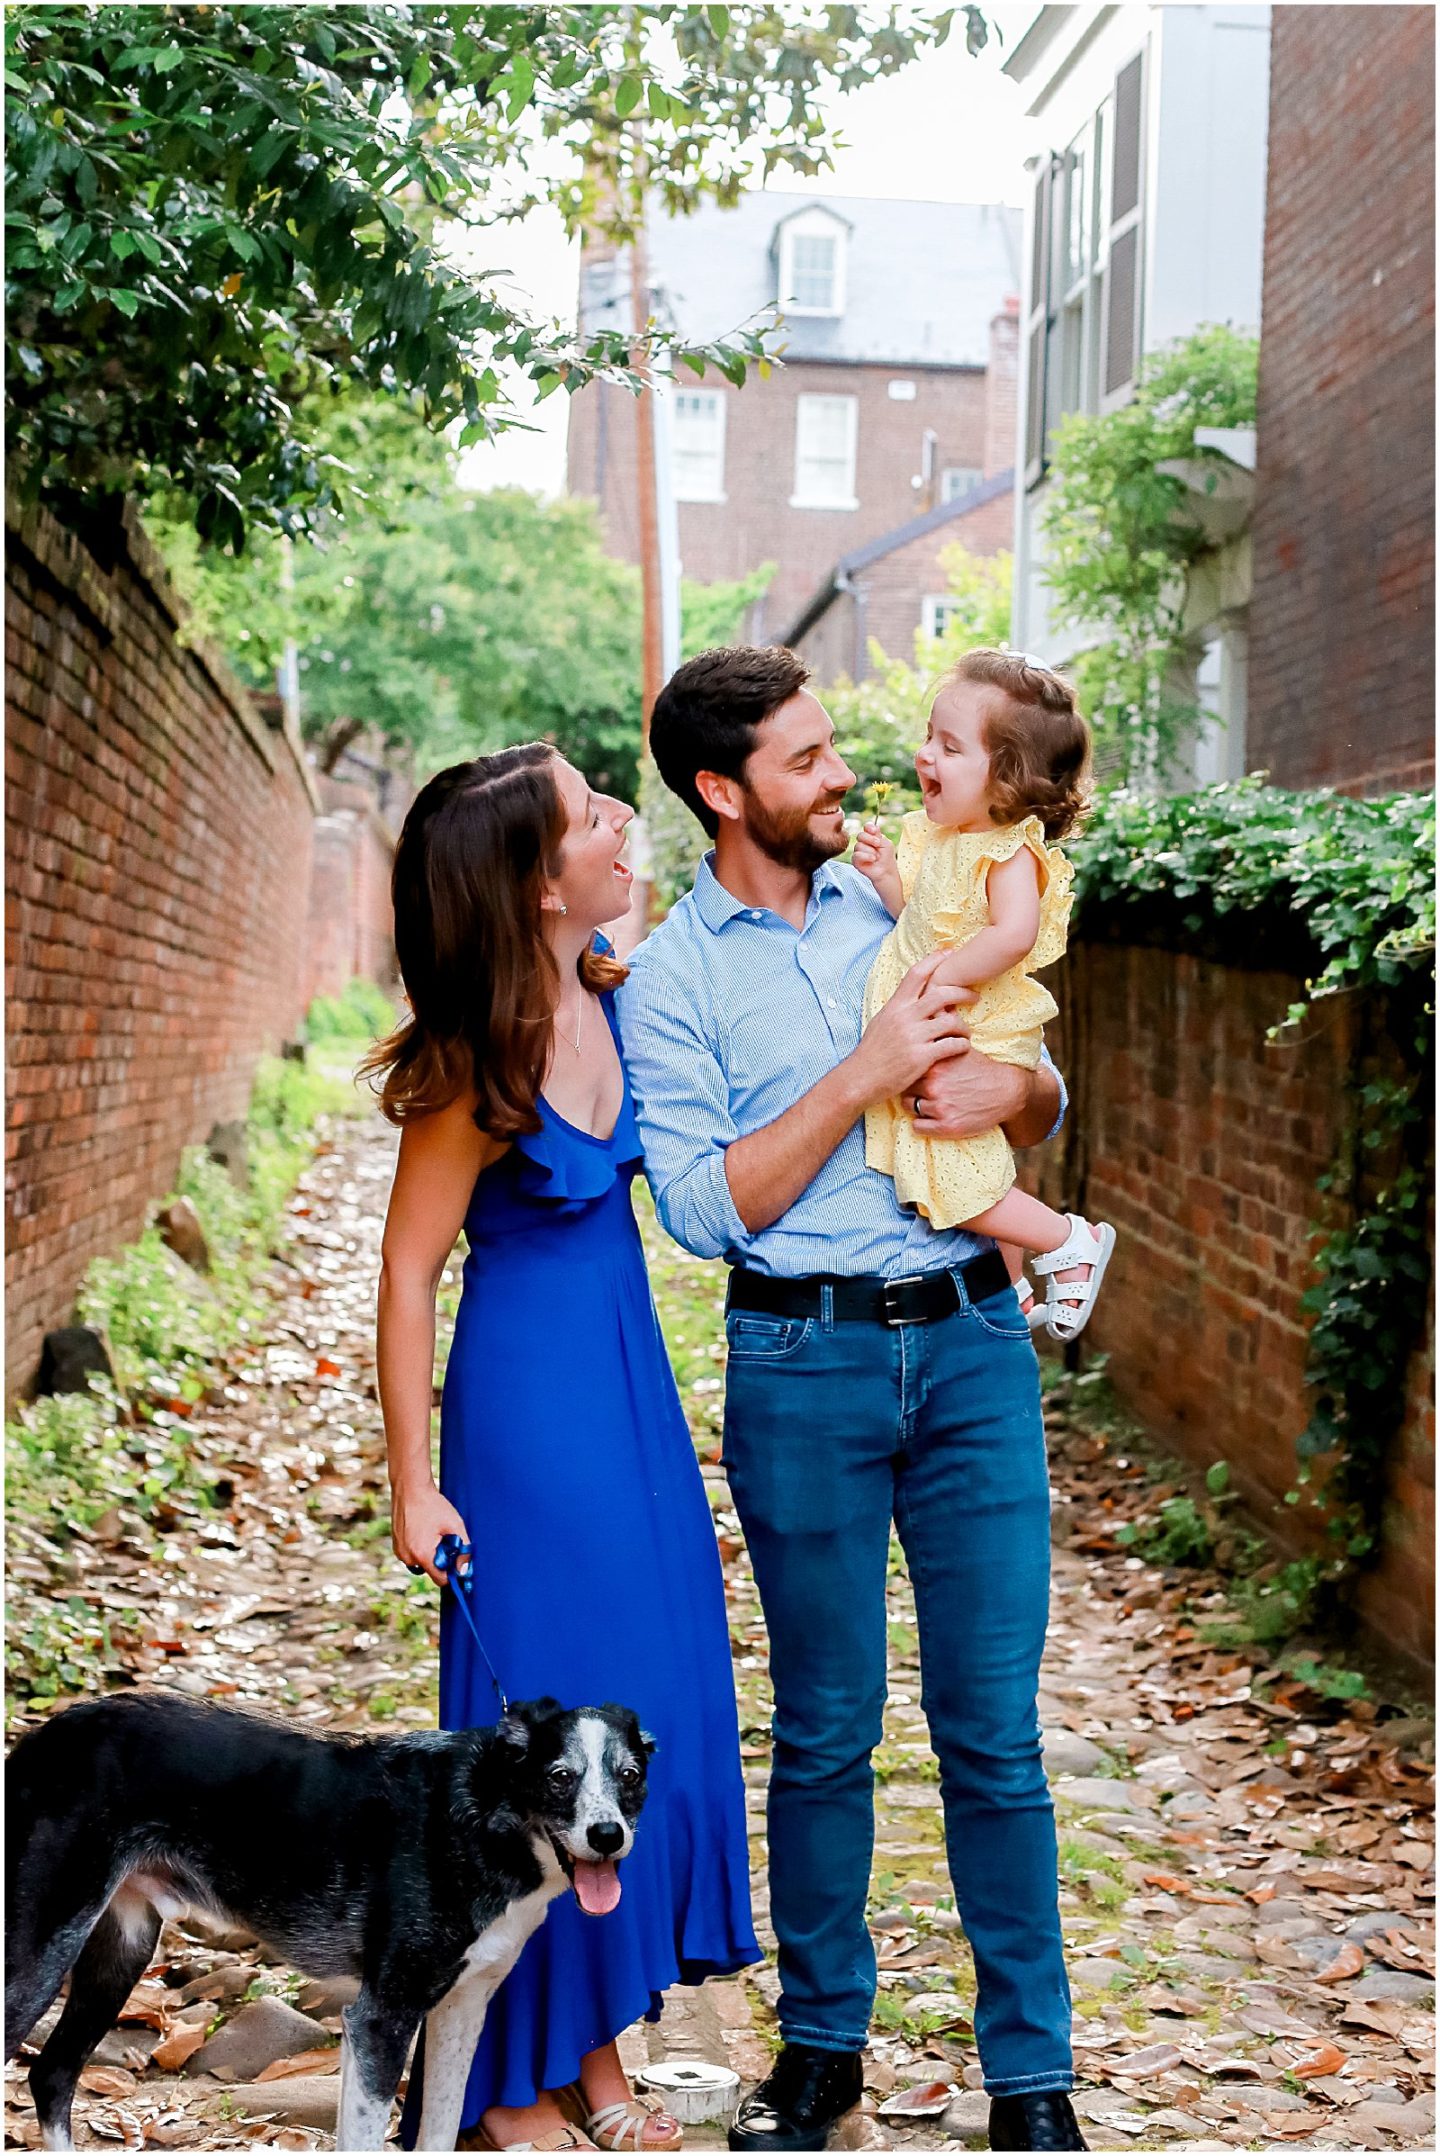 Family with dog cuddling child on Wales Alley in Old Town Alexandria